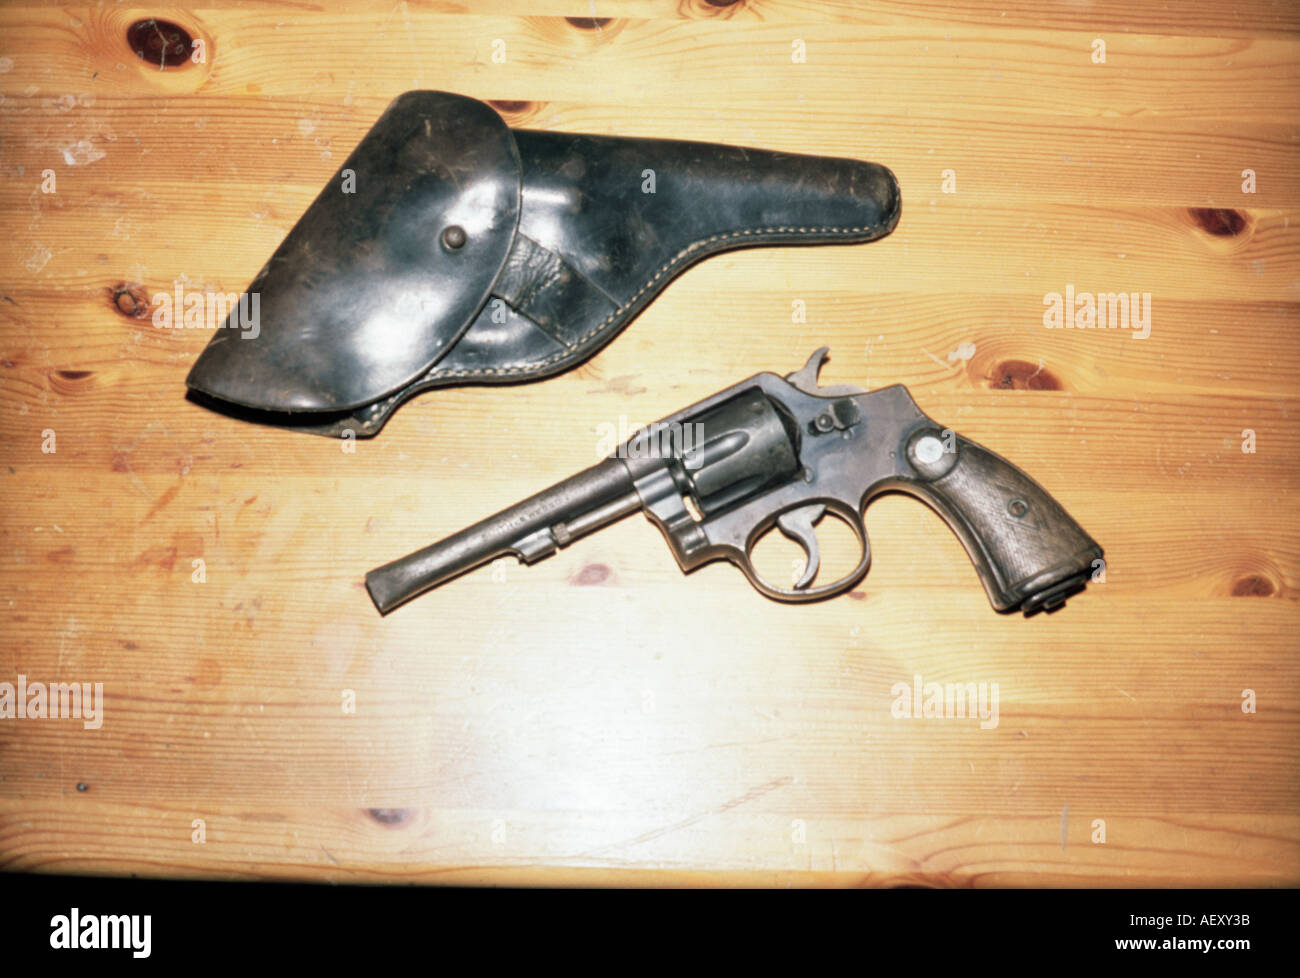 A colt and a its holster lying on a wooden table  Stock Photo